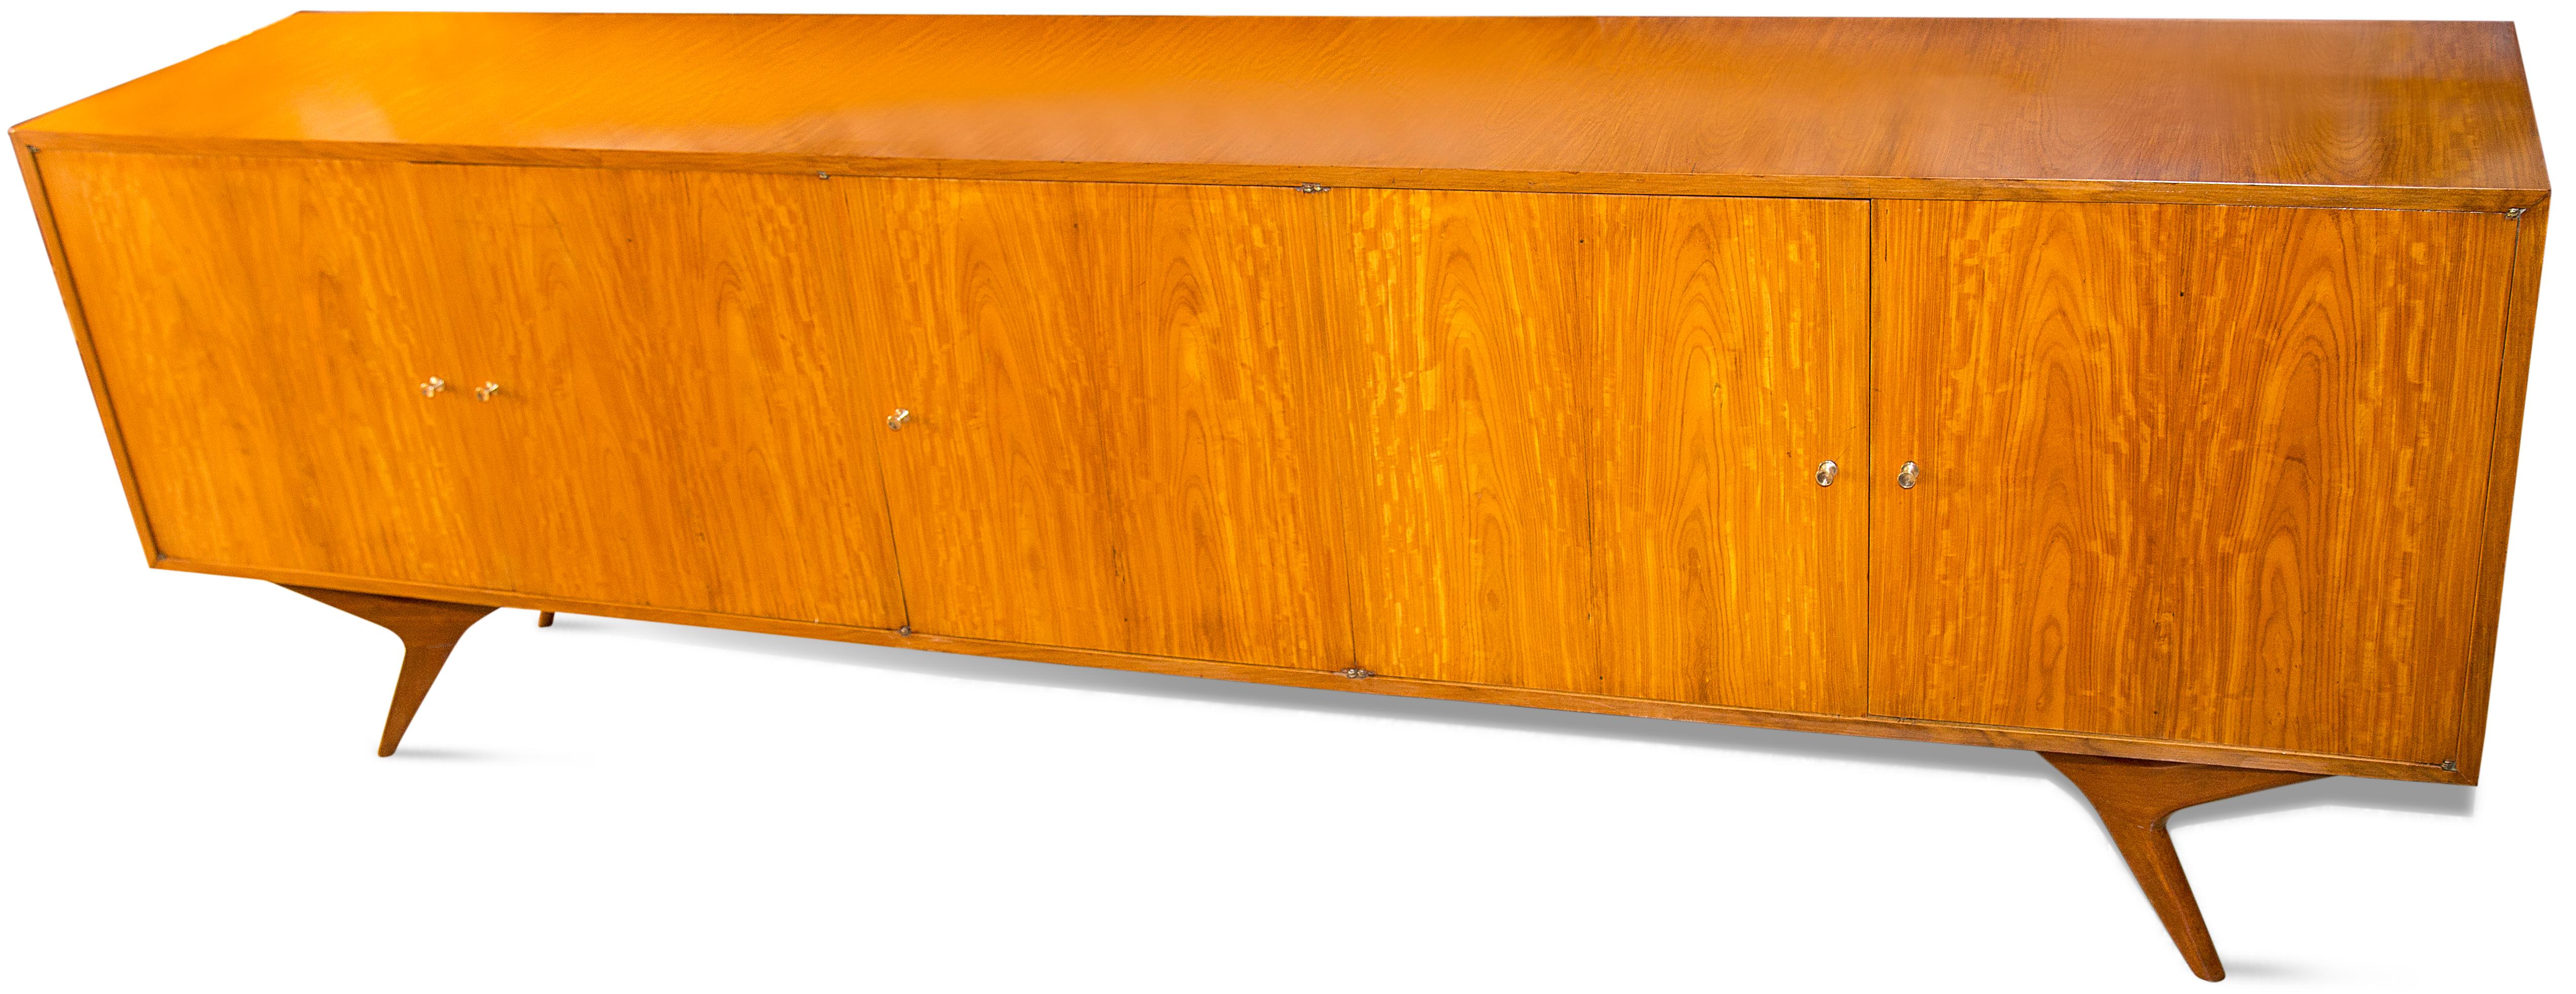 Mid-20th Century Brazilian Modern Credenza in Caviuna Hardwood by Forma Moveis, 1960’s, Brazil For Sale